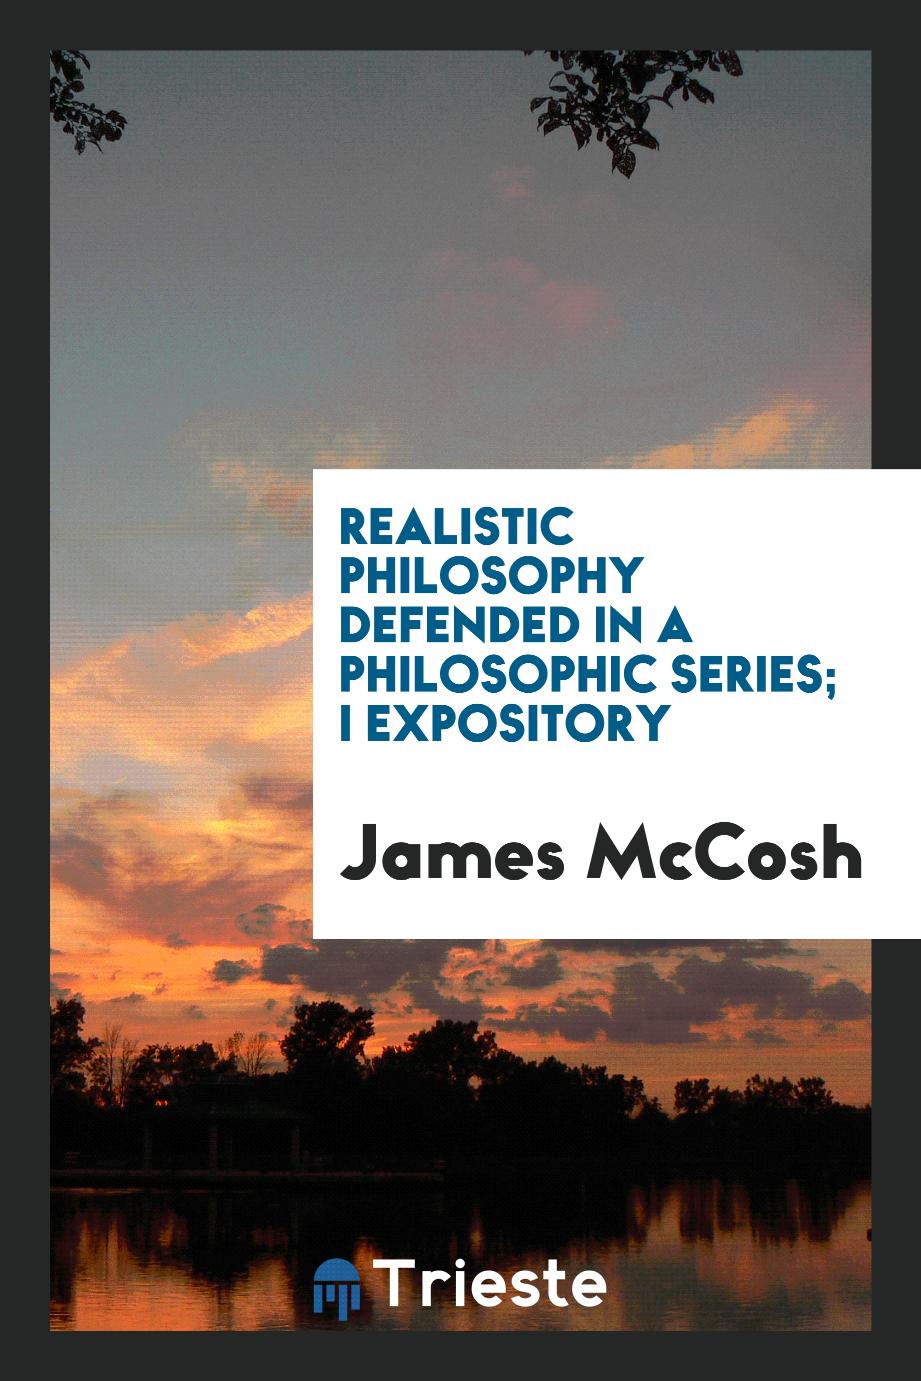 Realistic philosophy defended in a philosophic series; I Expository